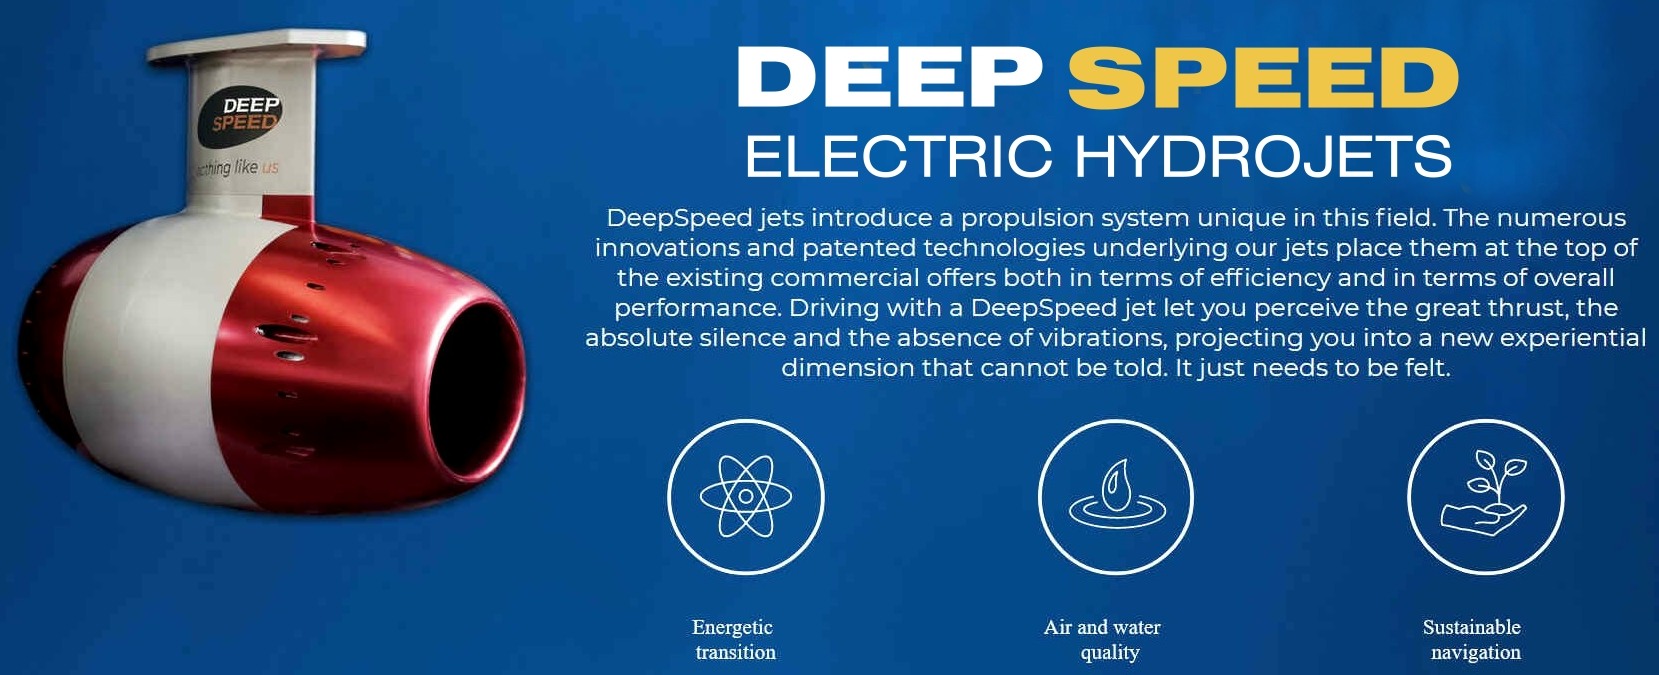 Deep Speed electric hydrojets 